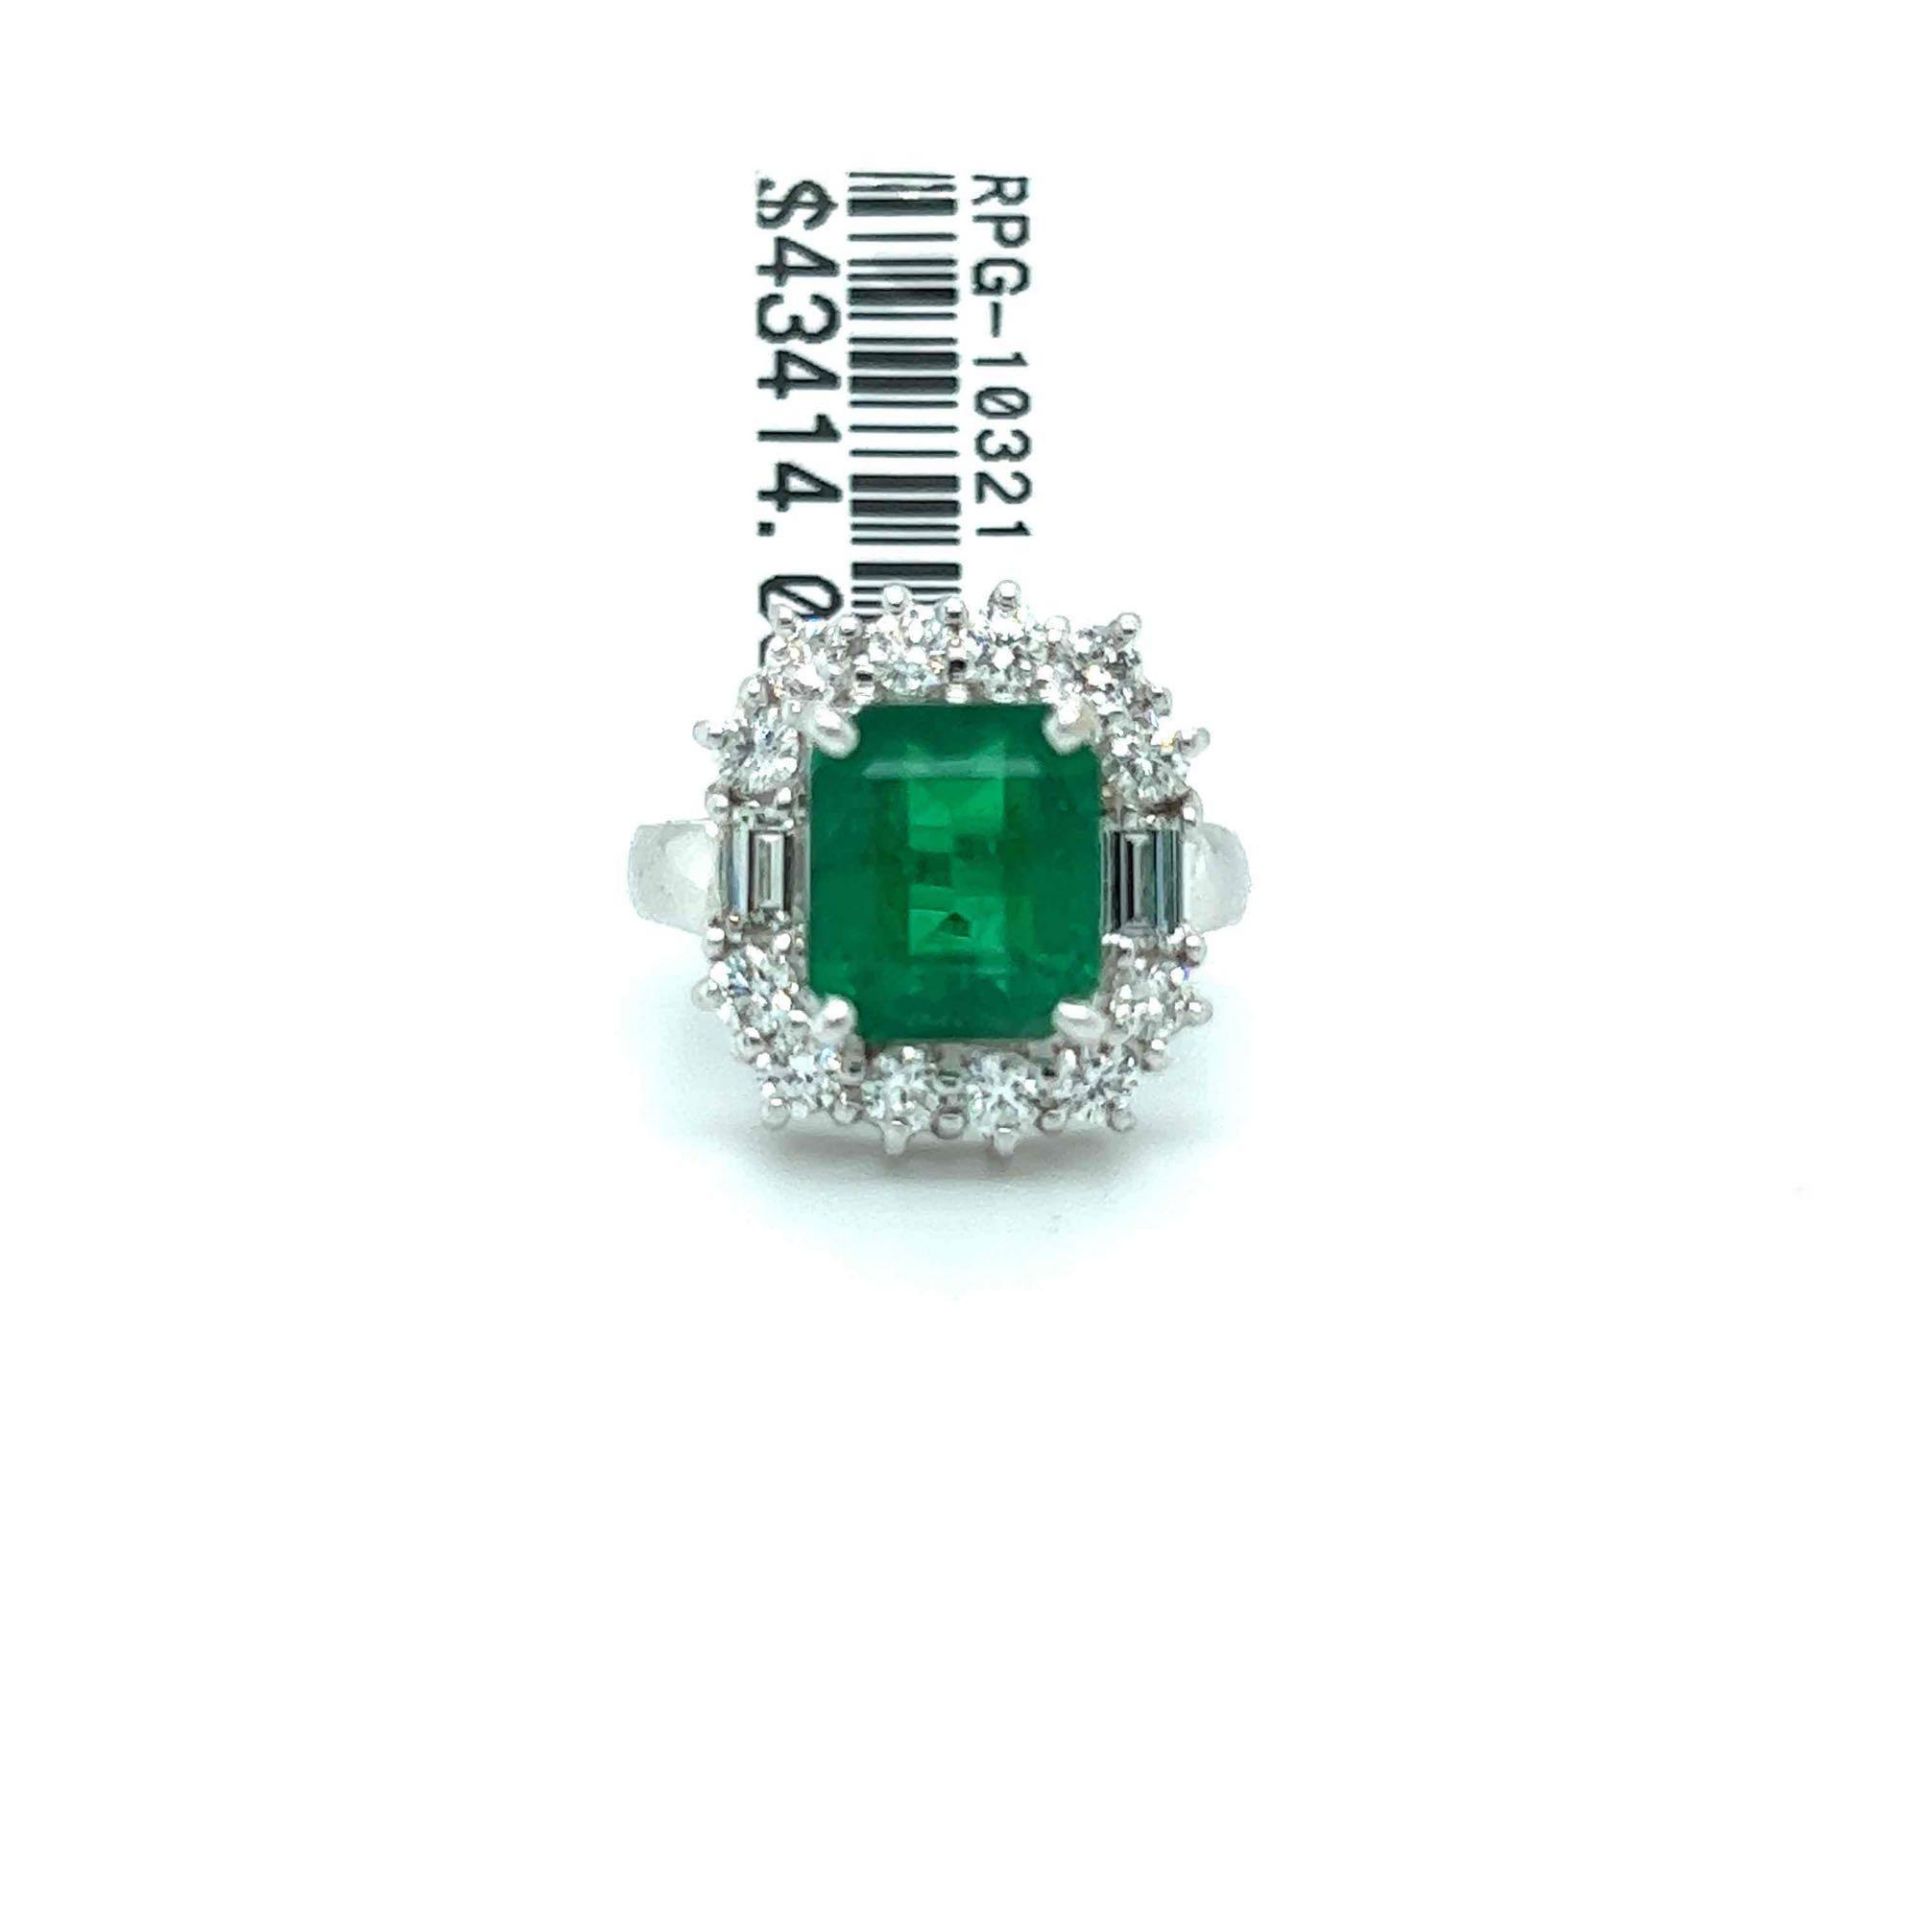 4.40CT NATURAL EMERALD AND 1.22CT DIAMOND RING 18K WHITE GOLD